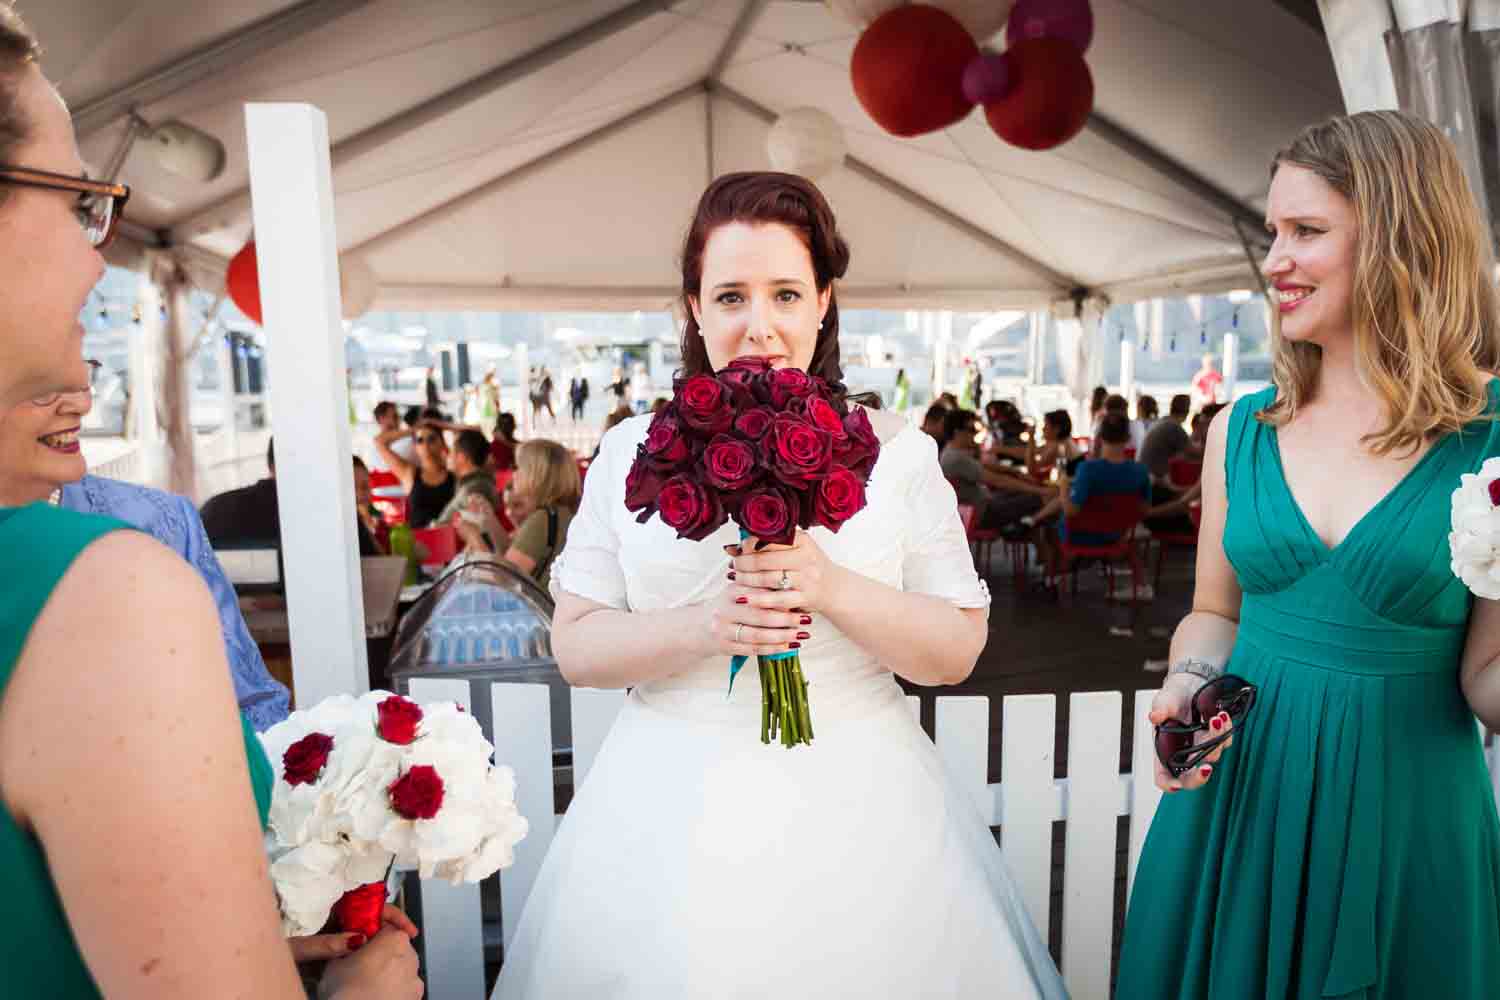 Bride with bouquet of roses between bridesmaids